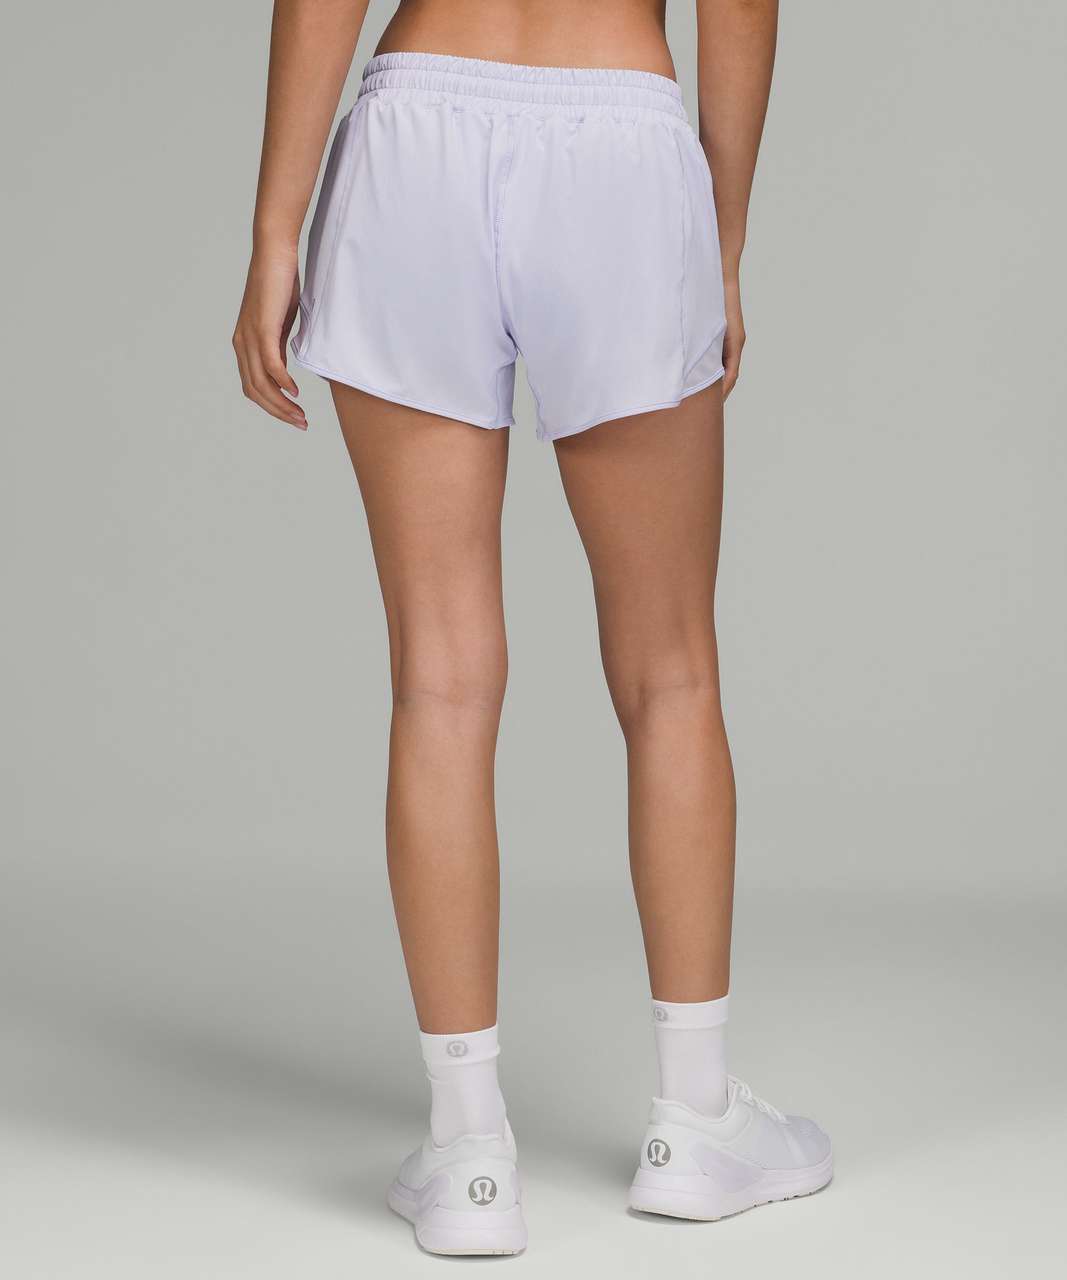 lululemon athletica Hotty Hot Low-rise Lined Shorts 4 in White